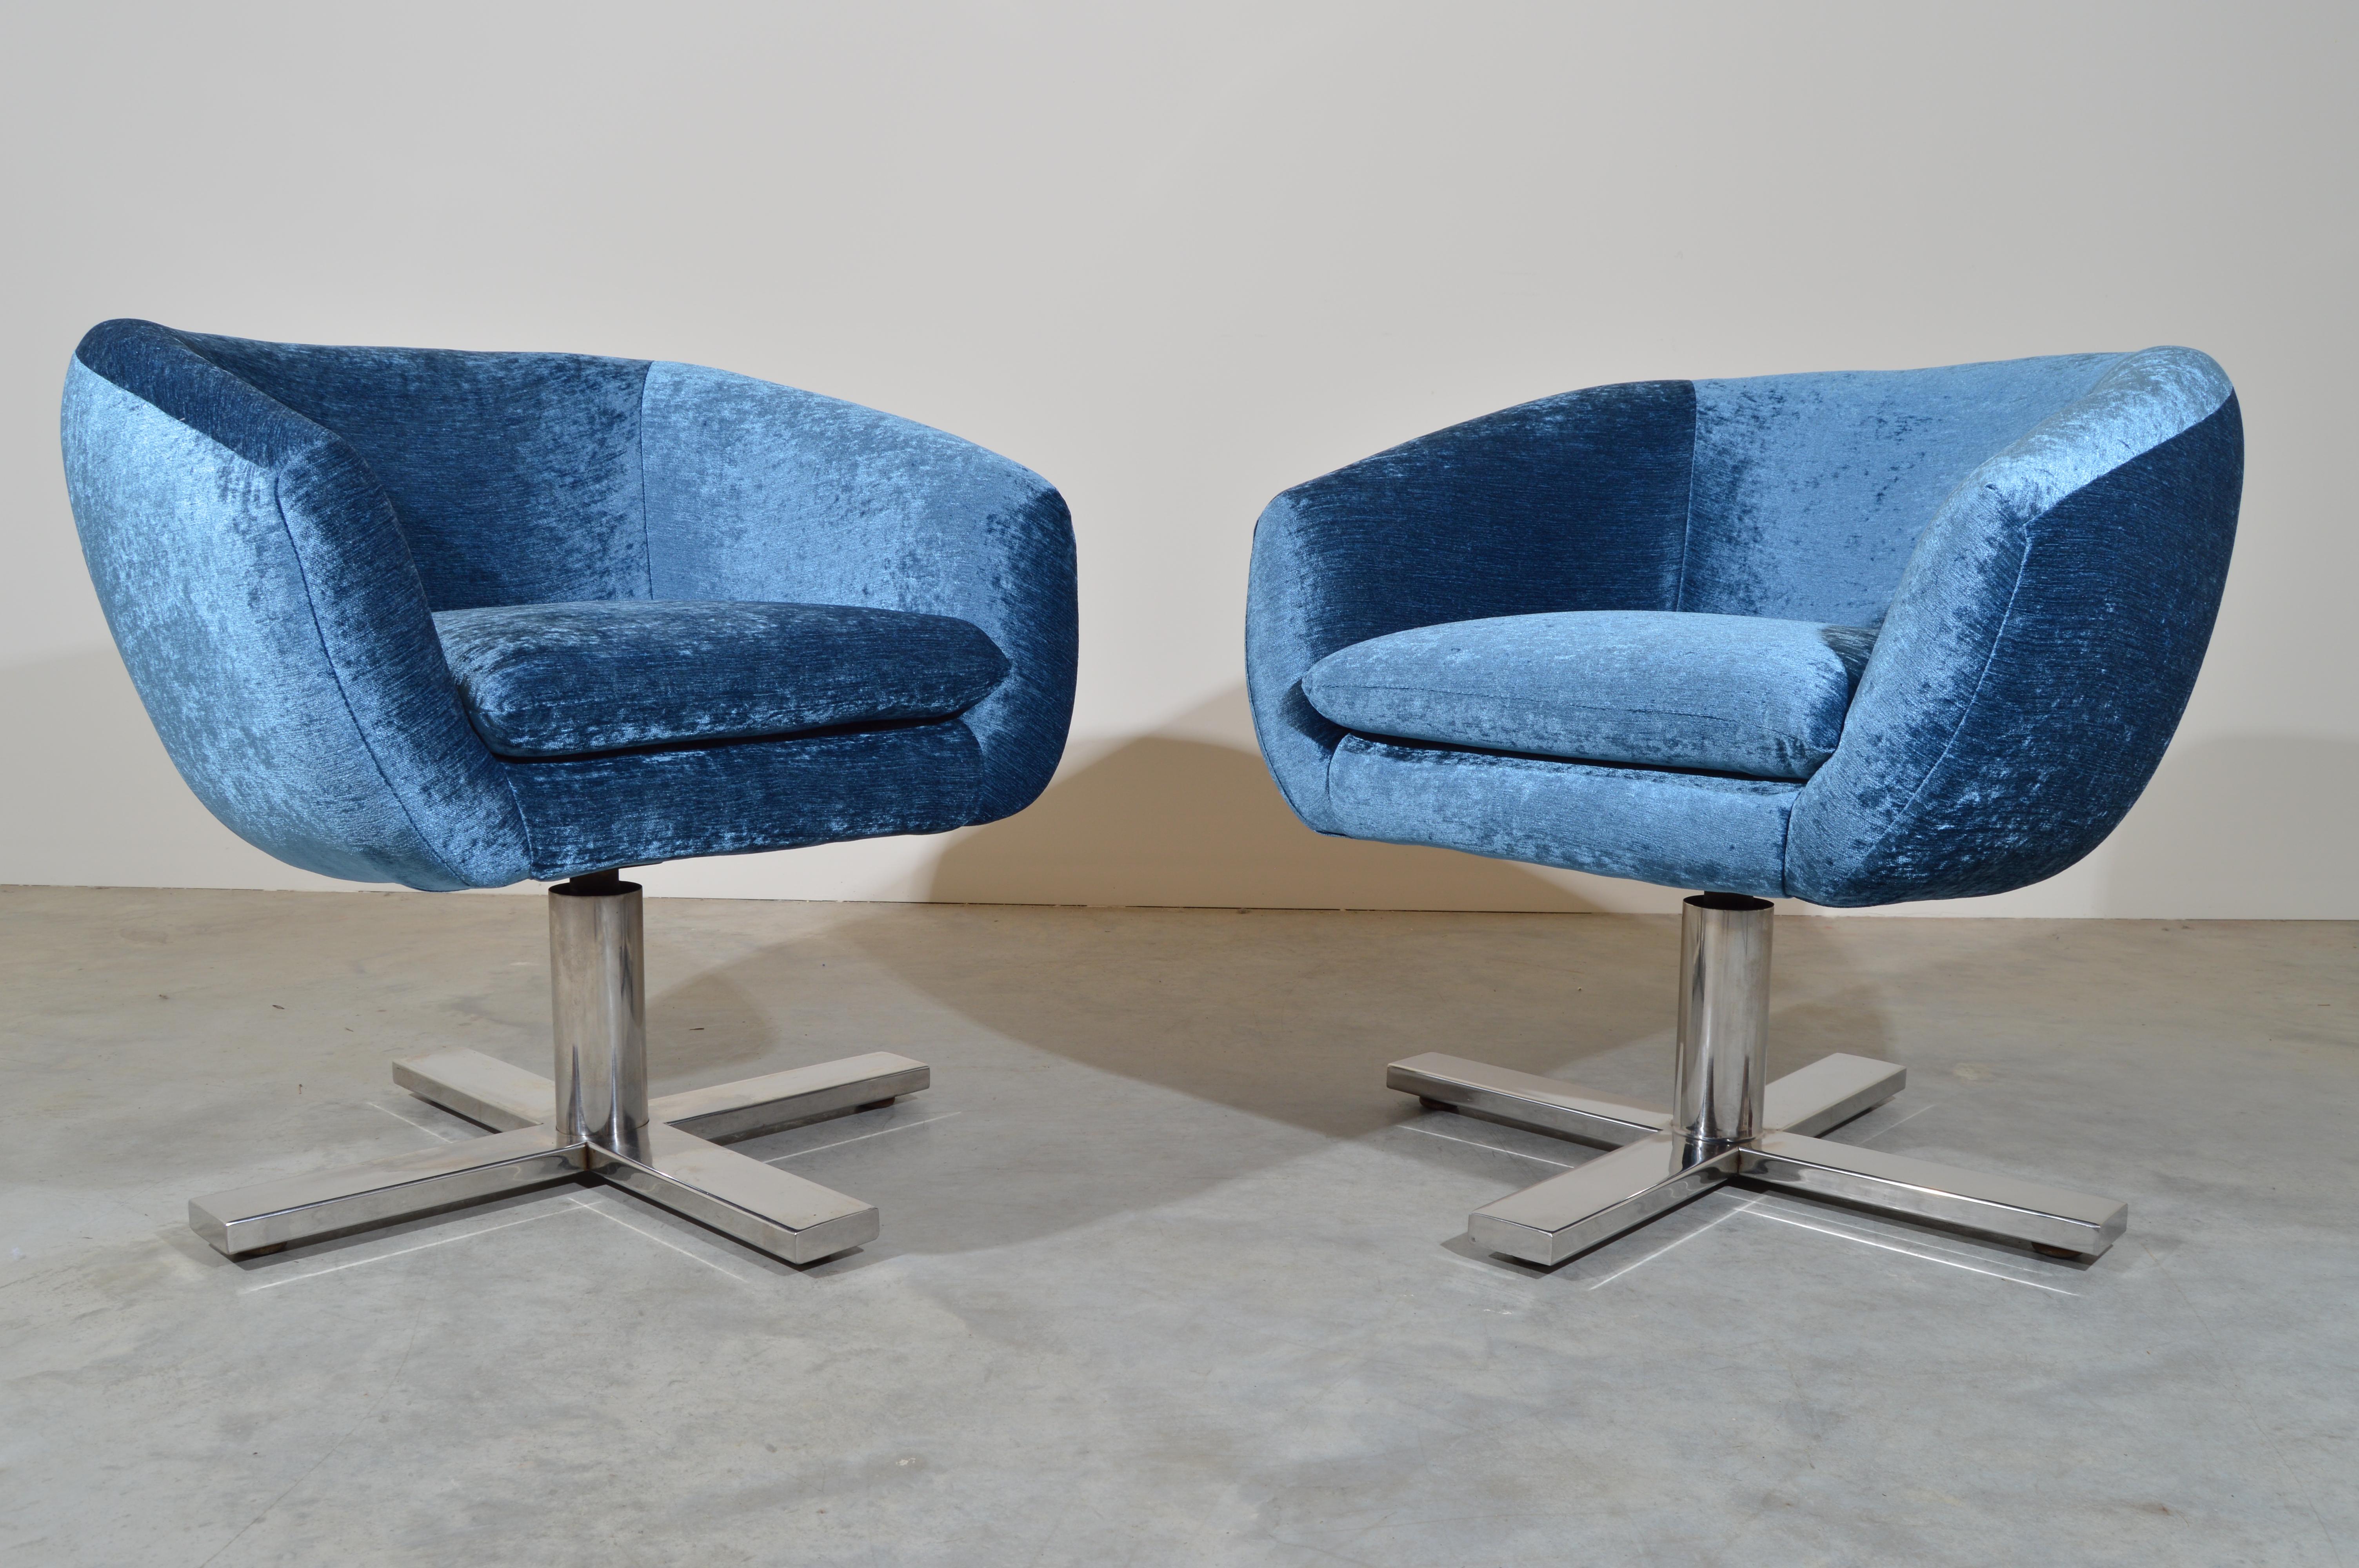 A rare pair of mid-century swiveling pod chairs by Edward Axel Roffman in smooth blue tone velvet. Incredibly soft and comfortable. The swivel action works perfectly and the Crypton fabric and cushioning are new. Original tags are still in place.